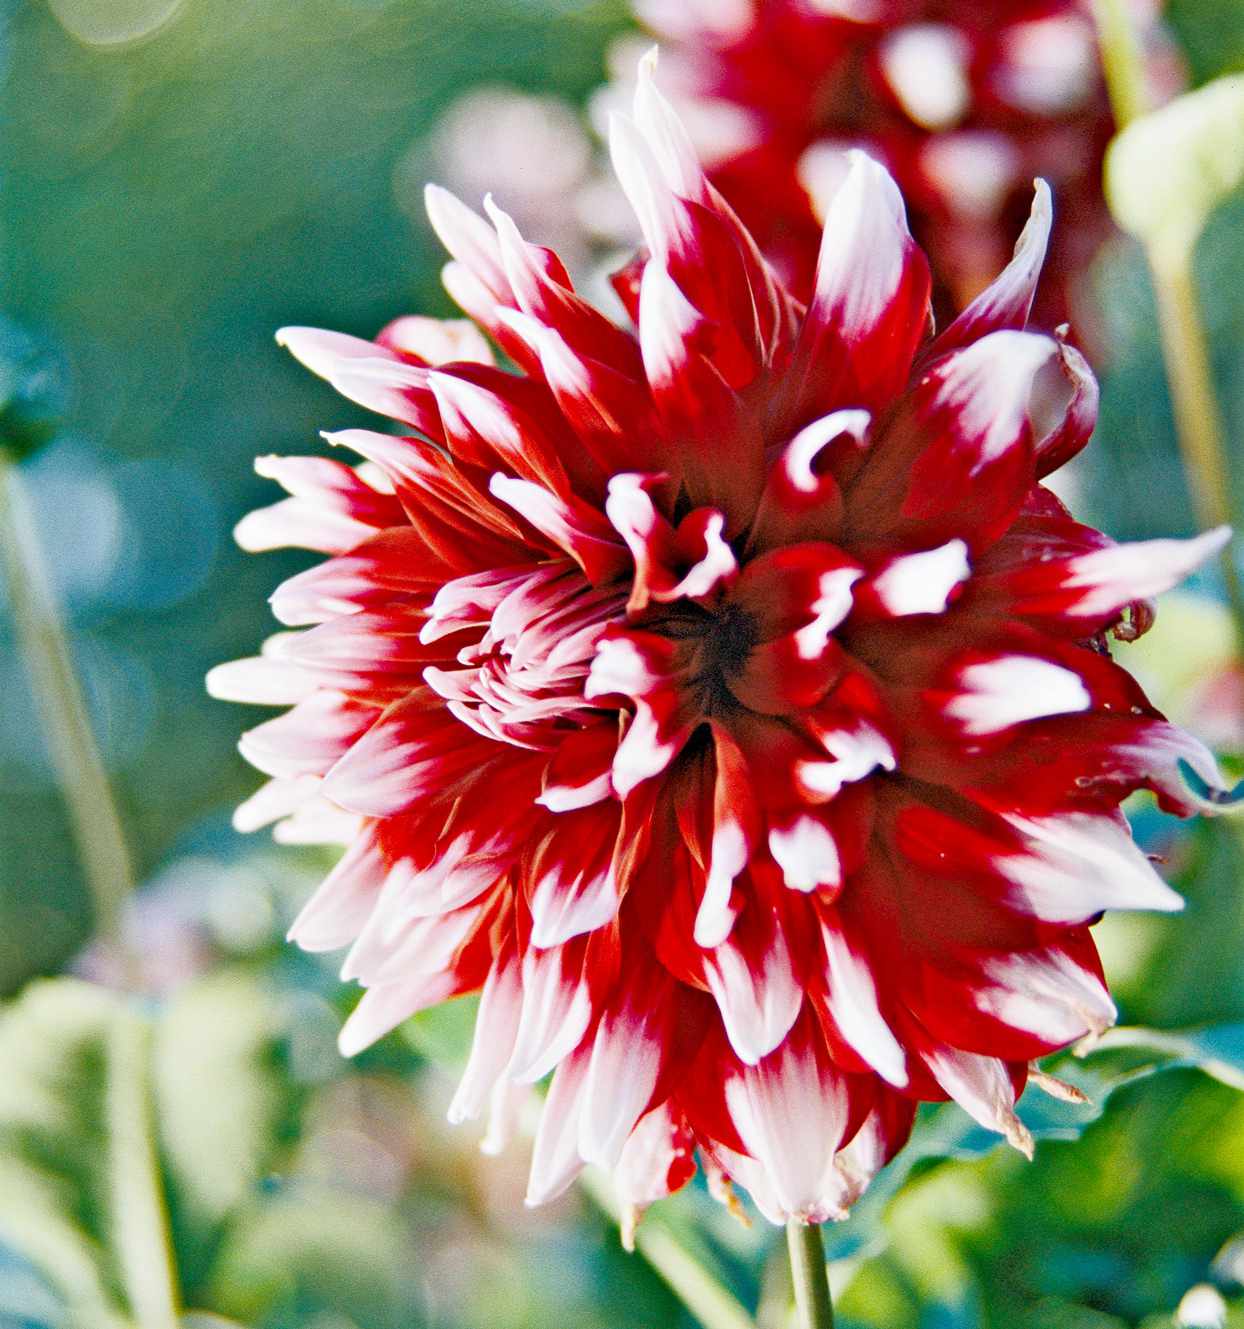 red and white 'Duet' dahlia